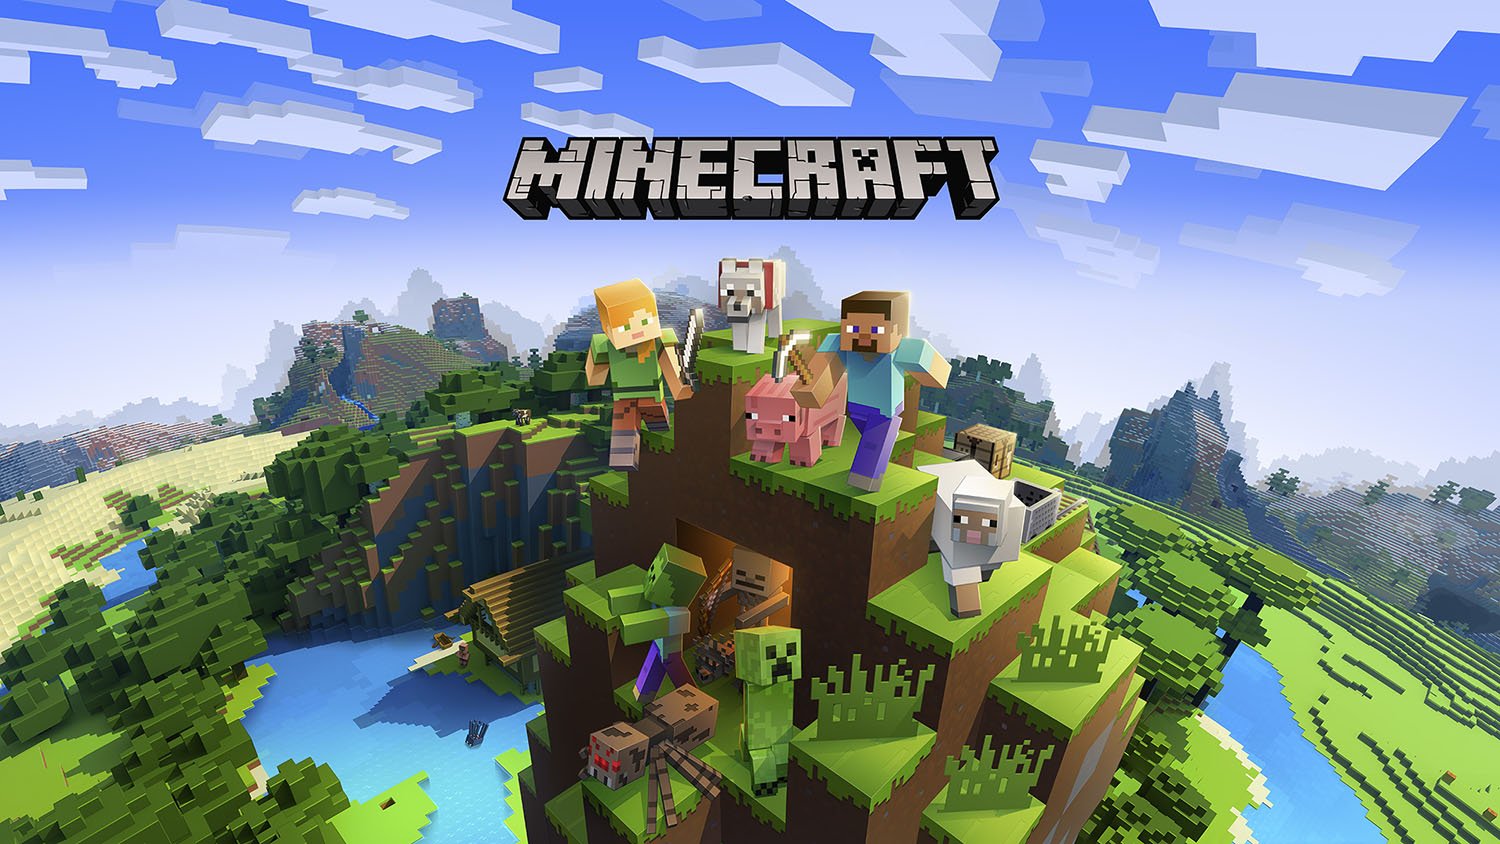 Universal fun: Minecraft is a cross-cultural hit in China